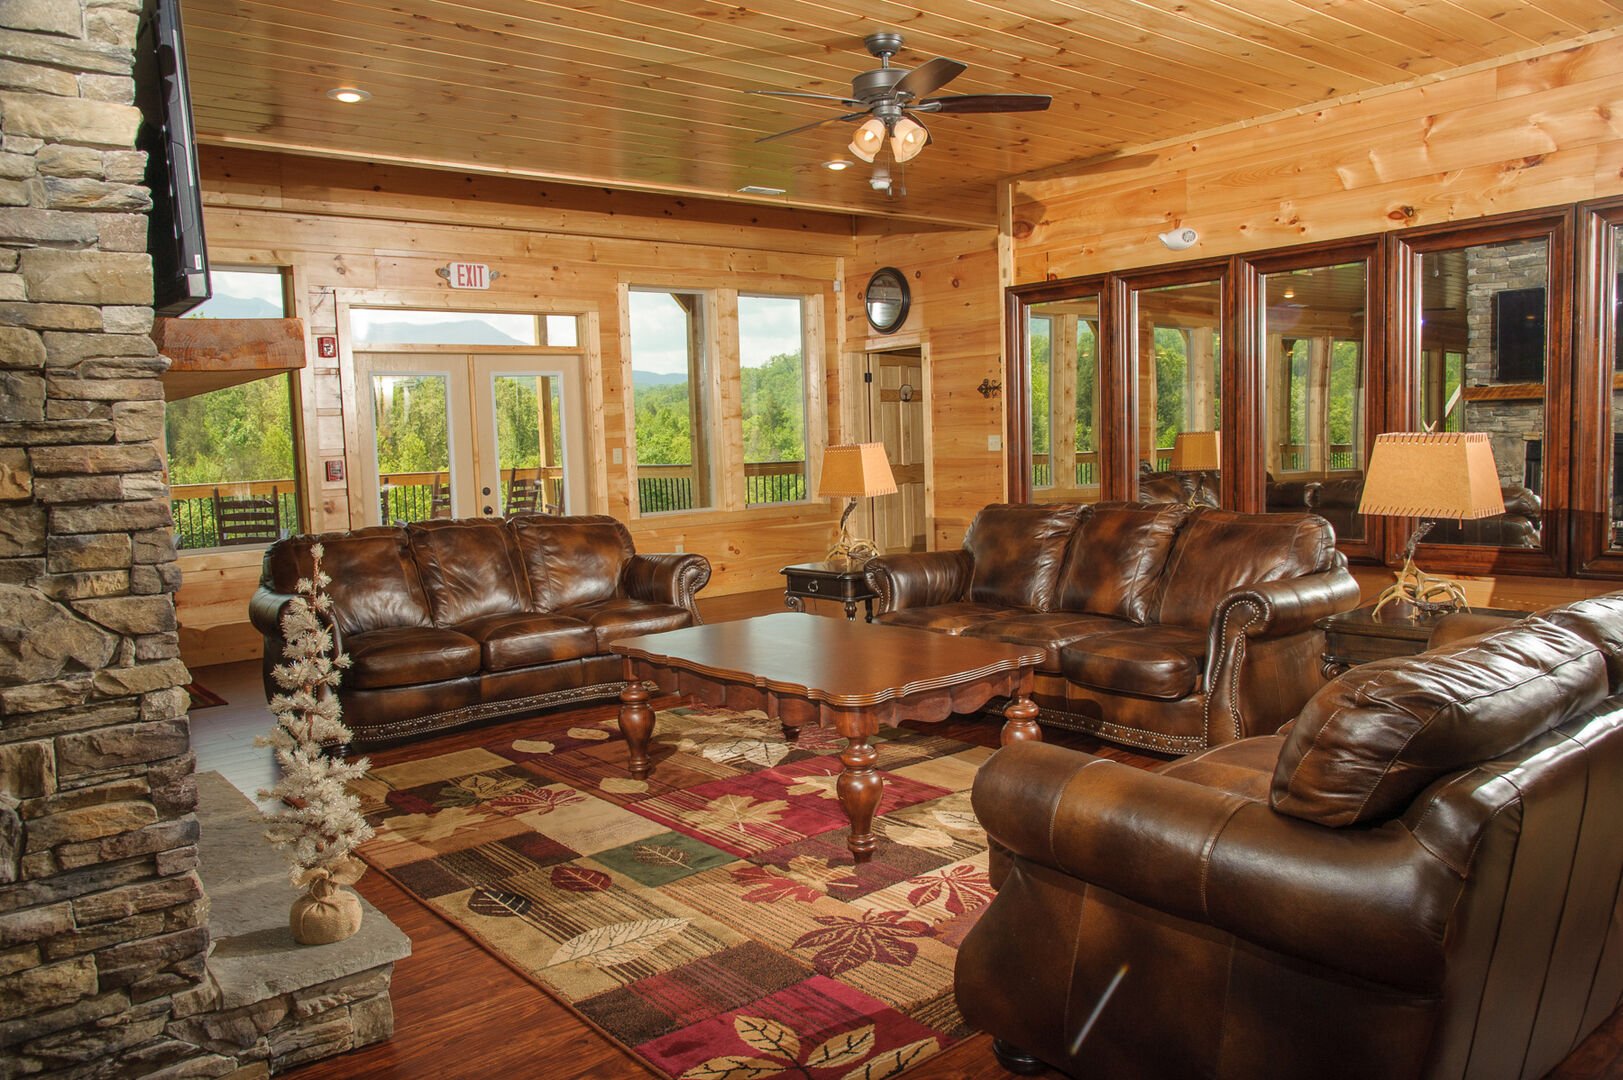 Living area with leather couches and ornate coffee table.